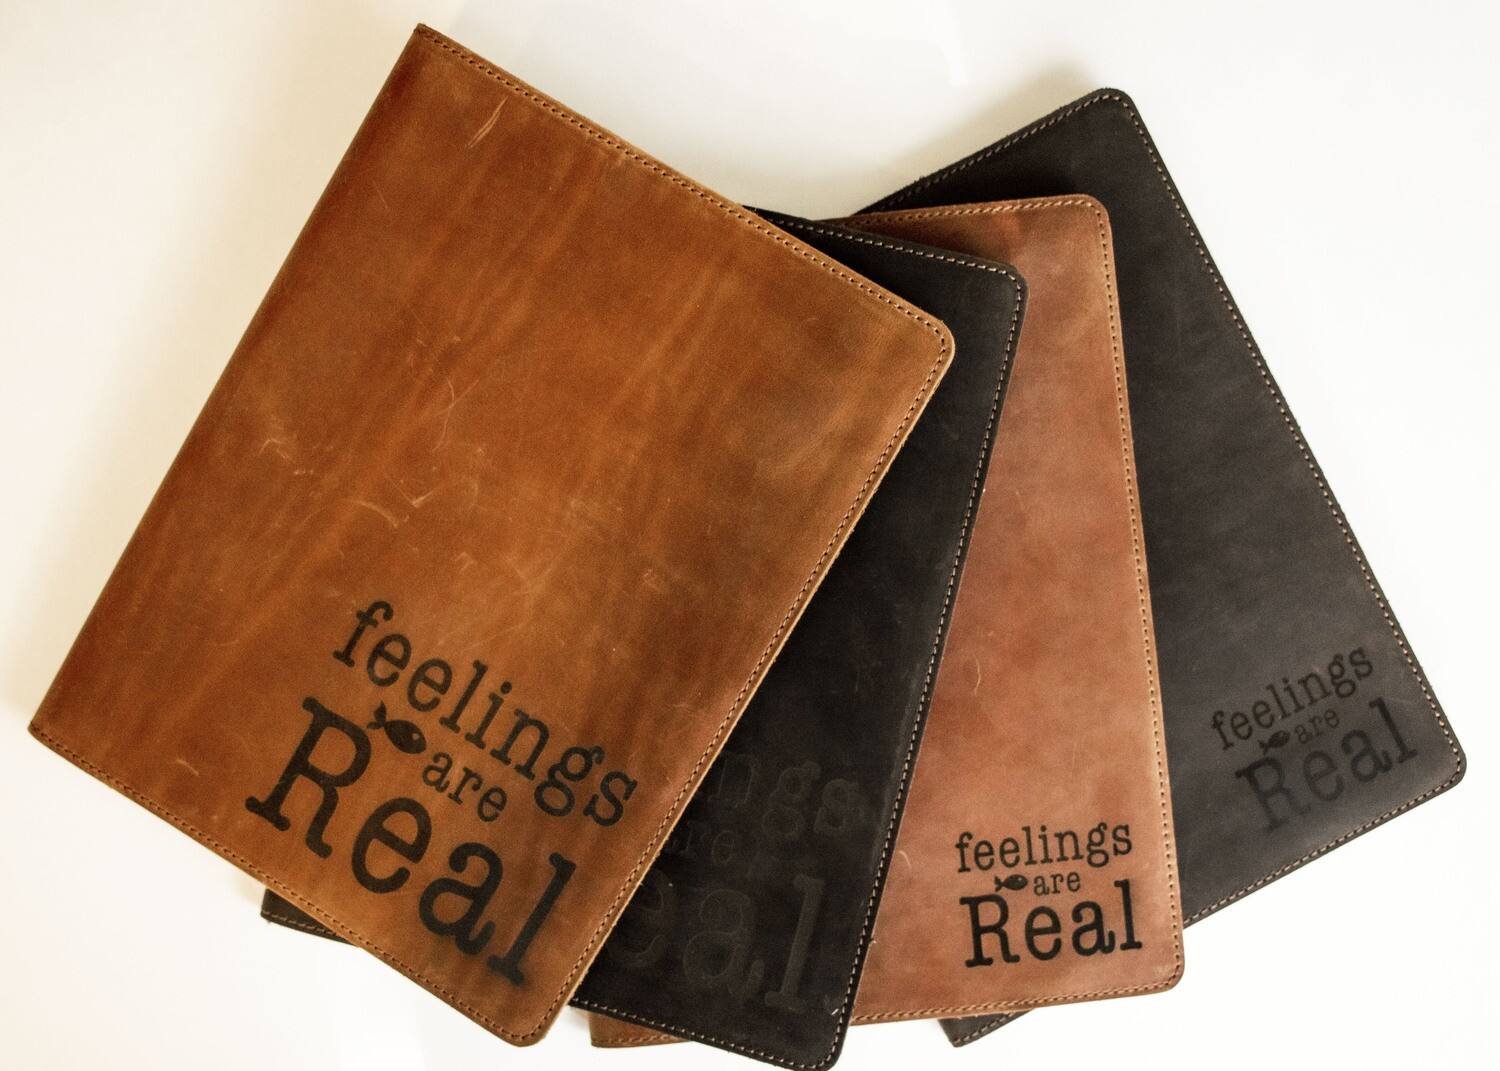 The Leather Journal As A Good Christmas Gift For Your Love Ones